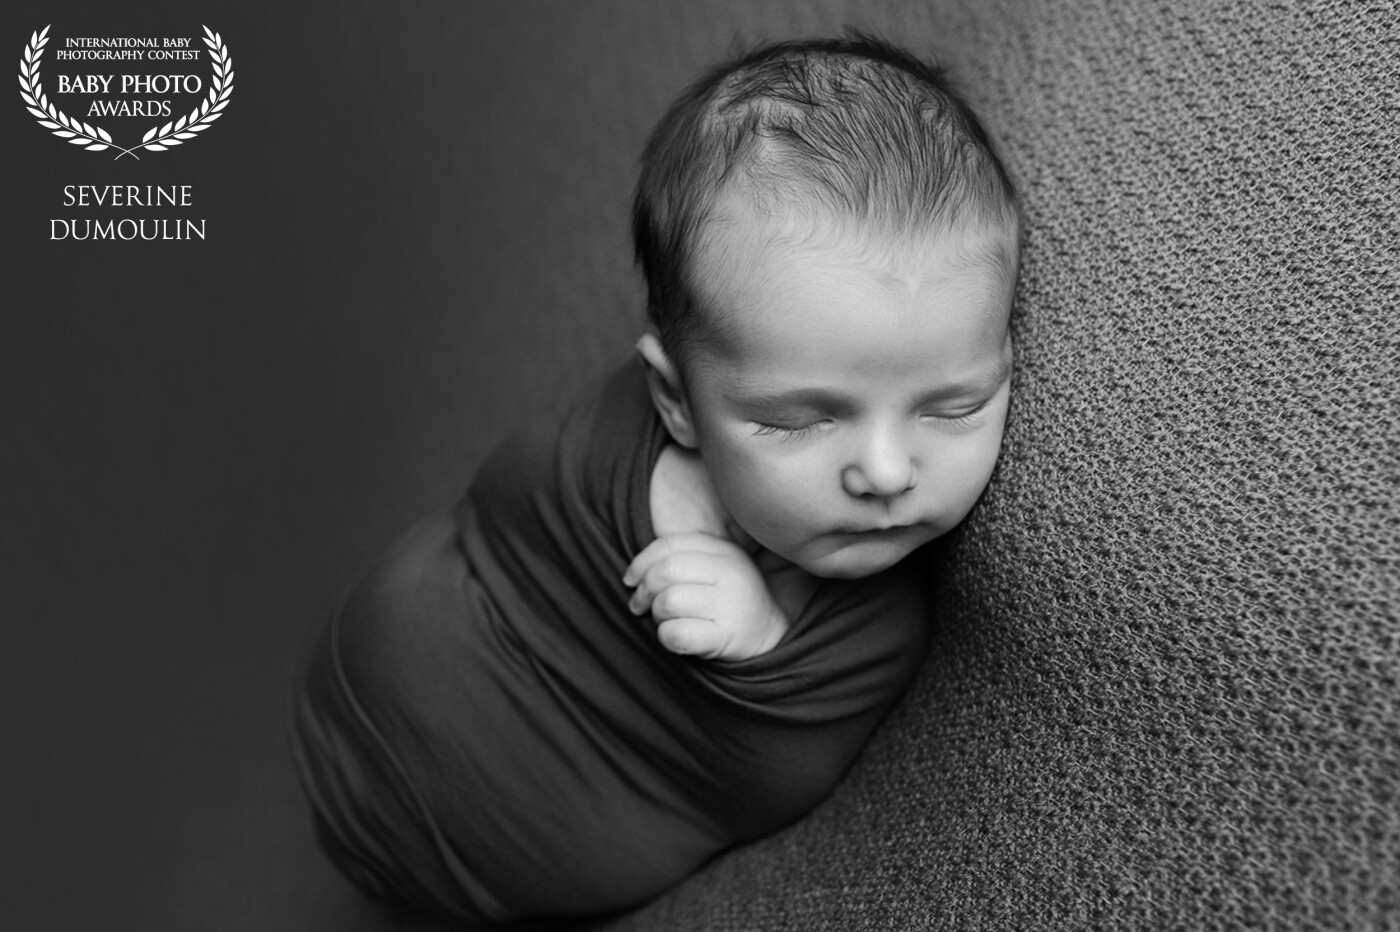 A newborn photographer is the most beautiful profession there is. This baby wanted to keep an eye on everything at the beginning of the session but went to dreamland afterward. What a cutie! 